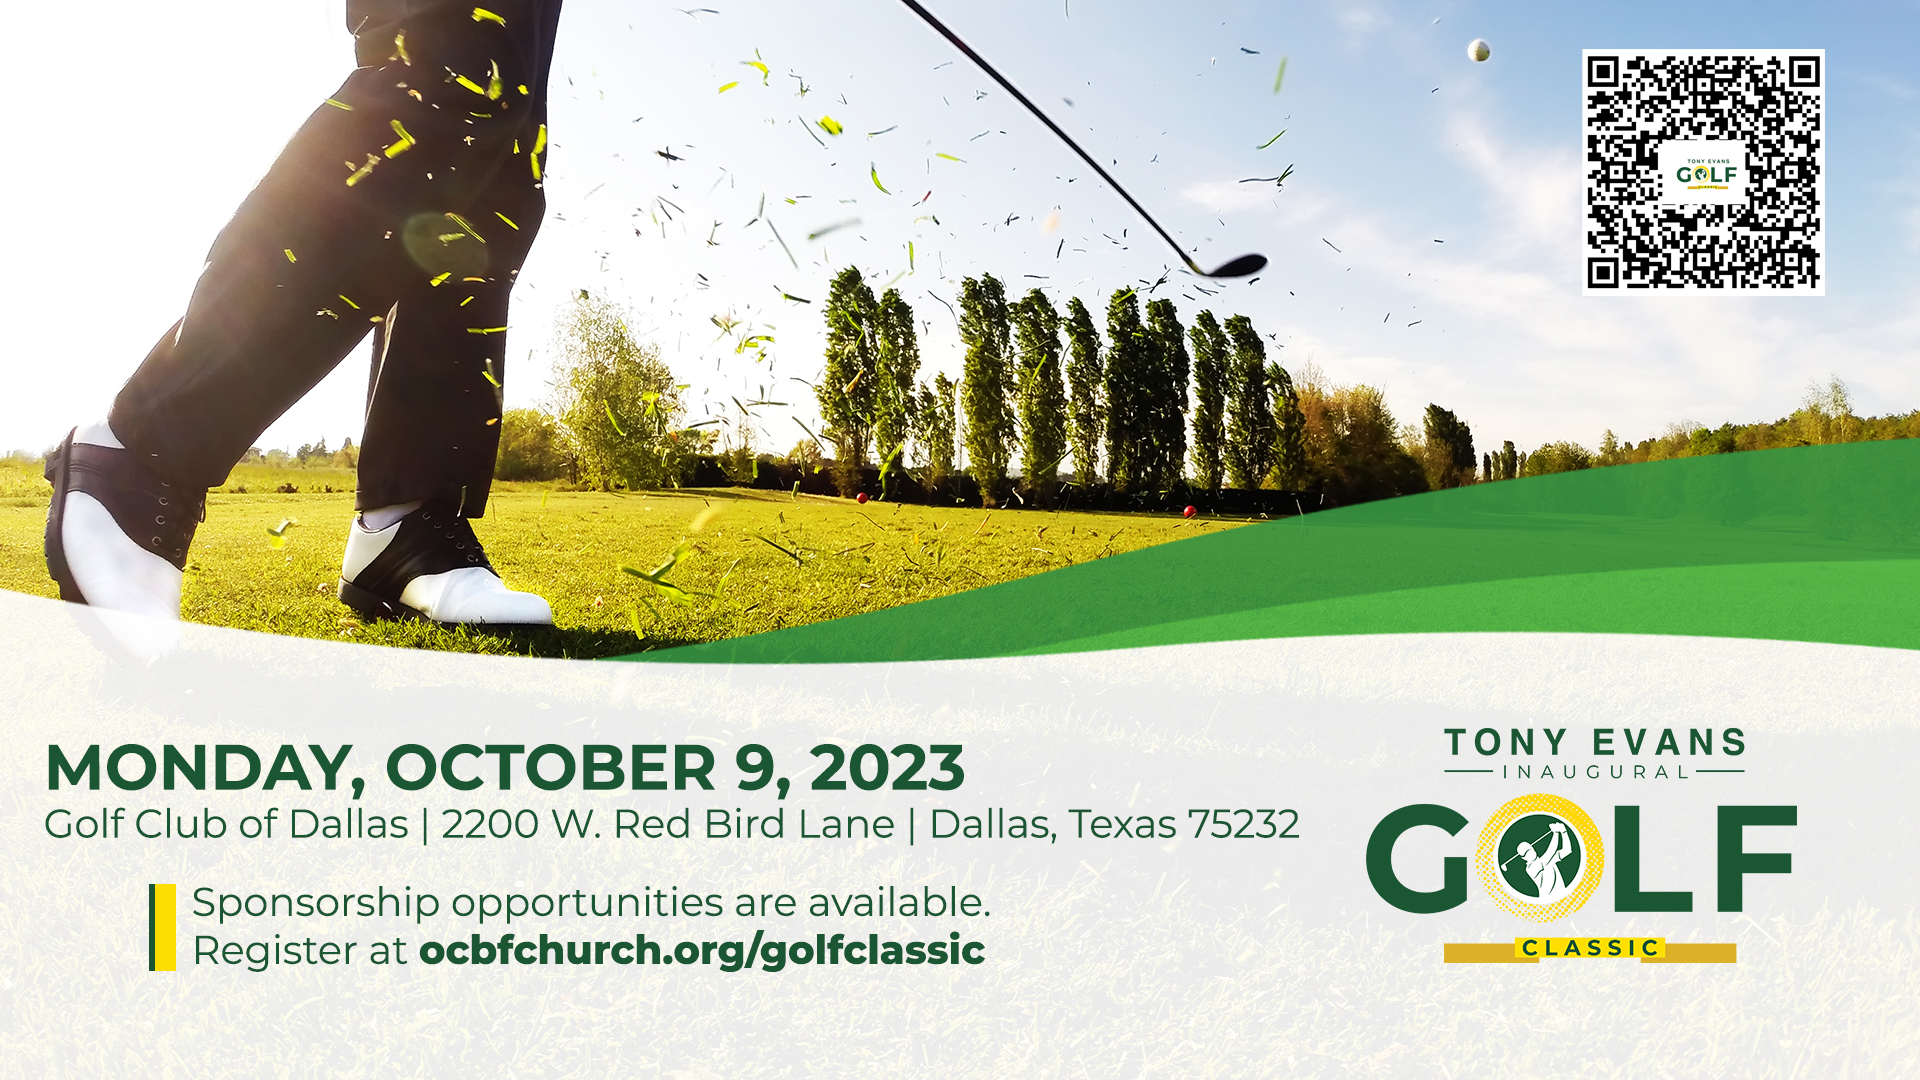 2nd Annual Tony Evans Golf Classic at the Golf Club of Dallas October 9, 2023